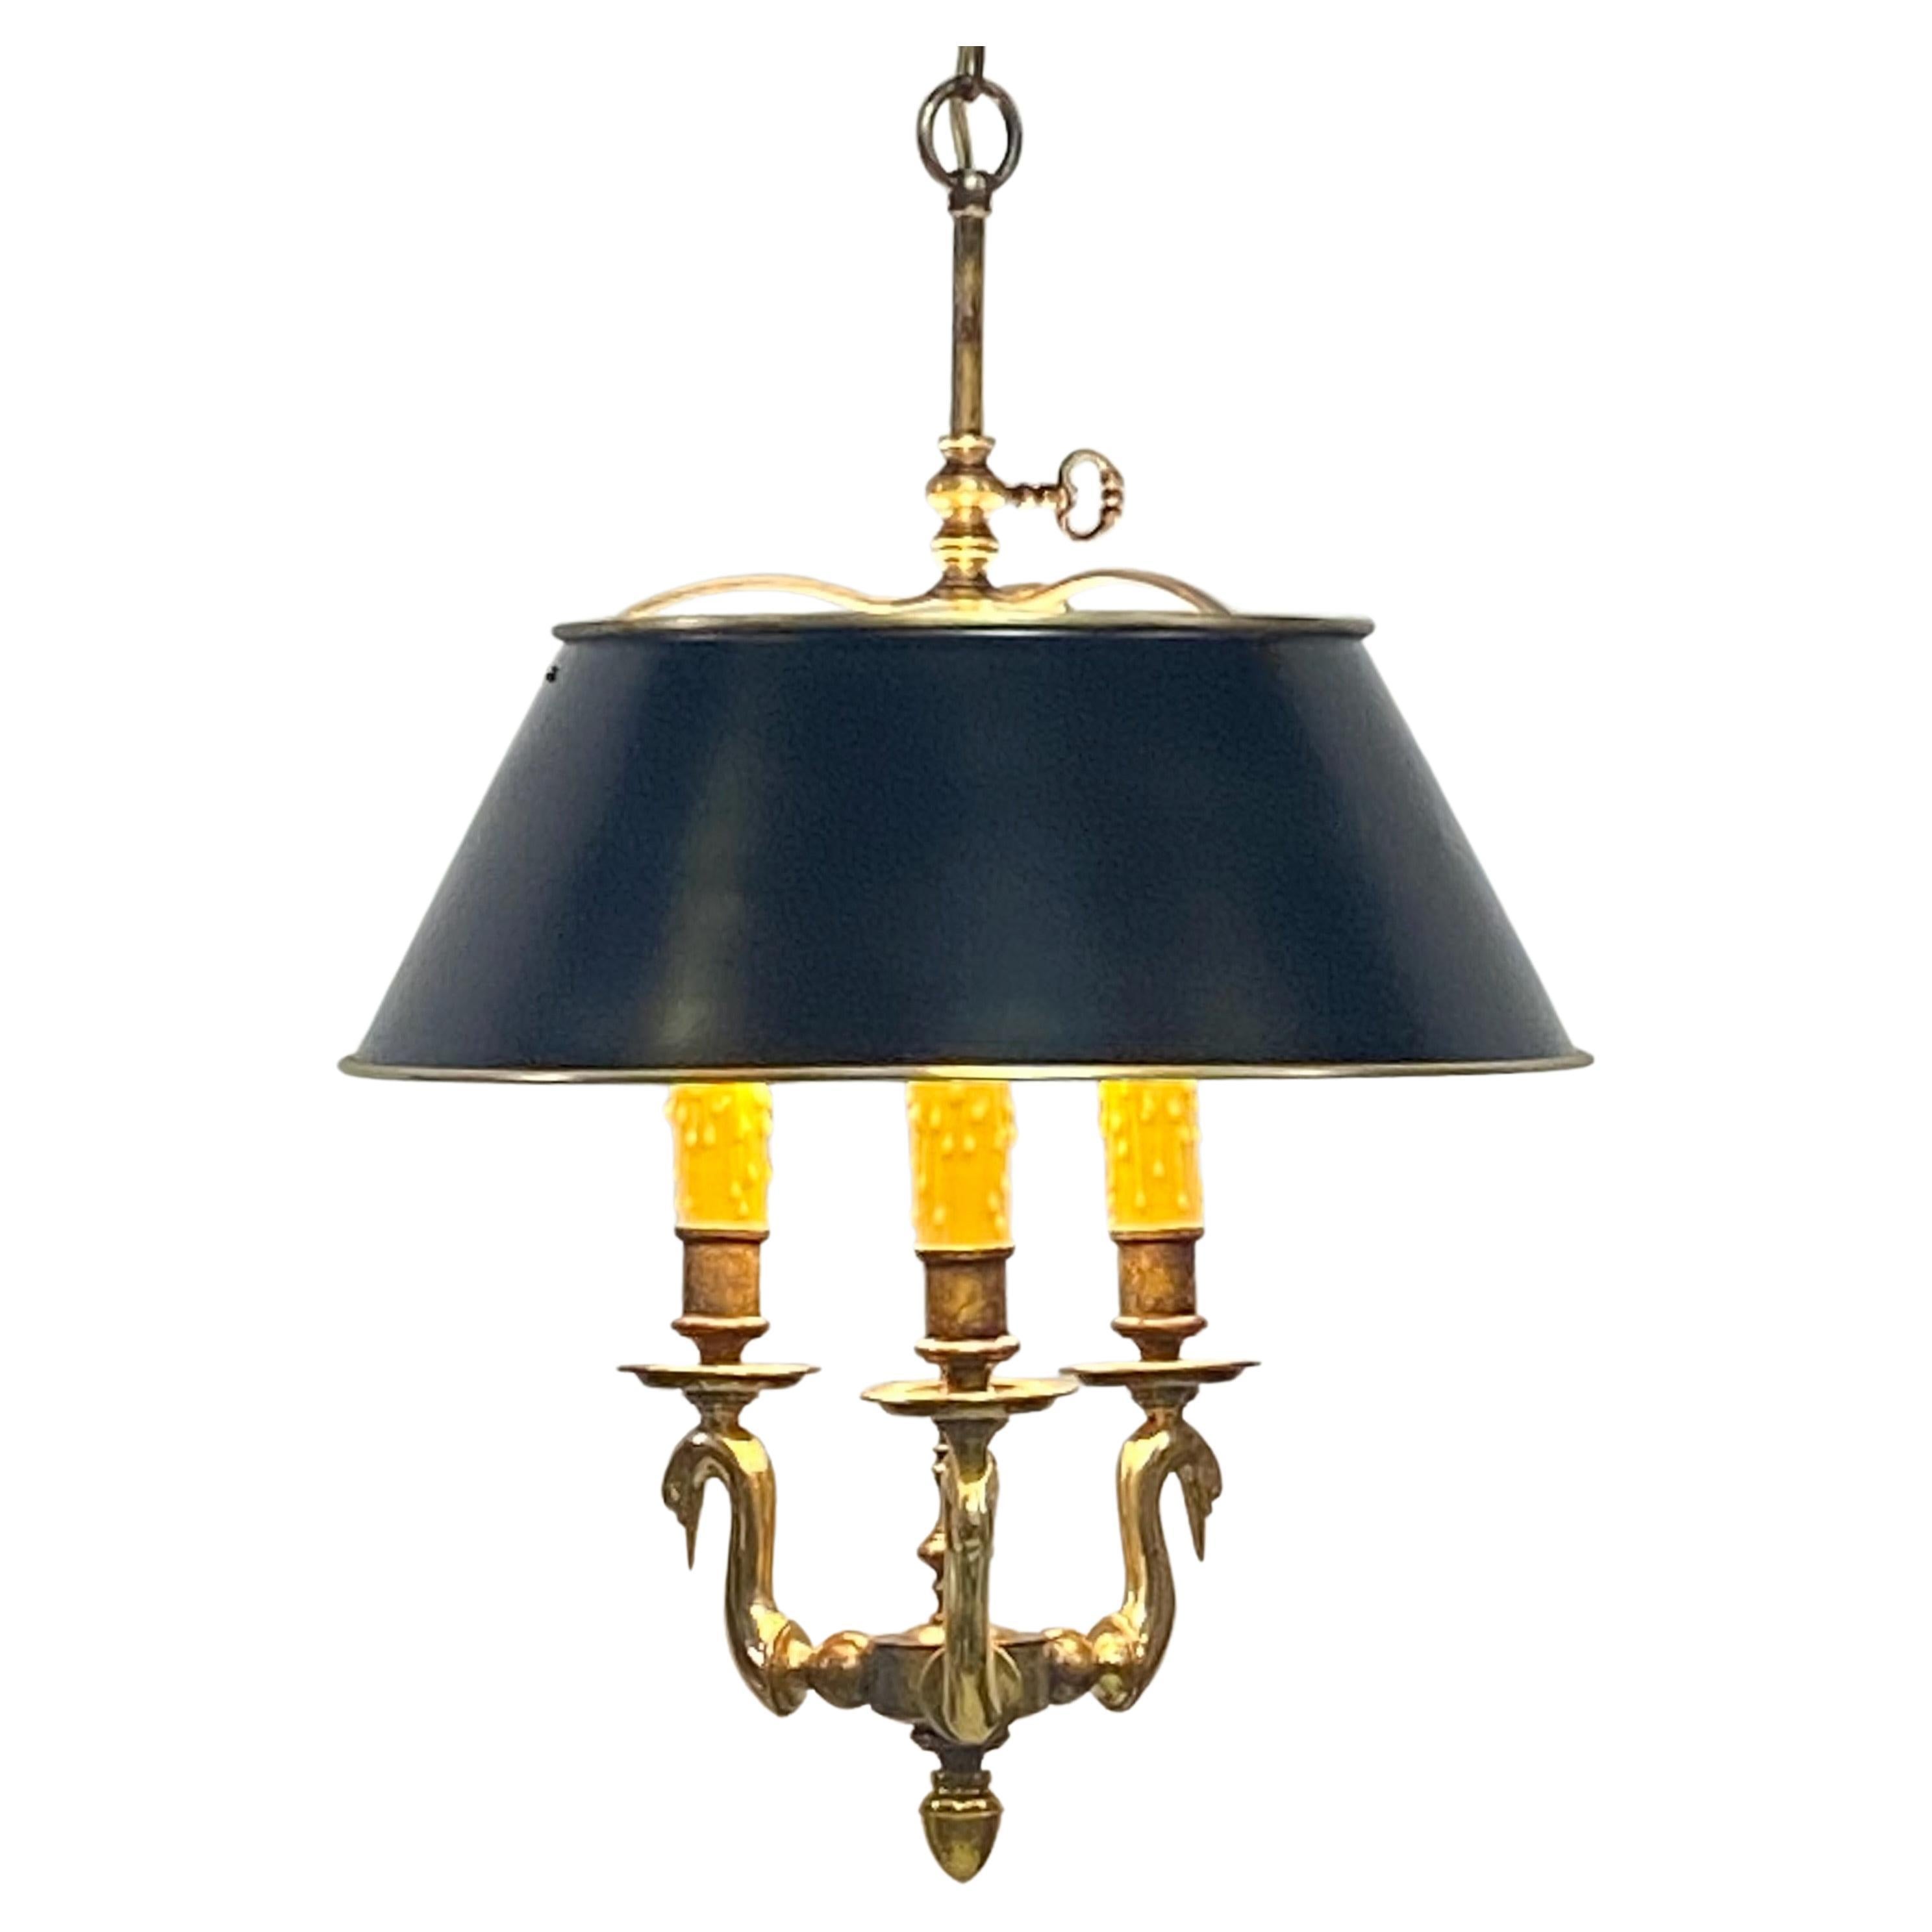 French Empire Style Hanging Bouillotte Brass Pendant Light Fixture